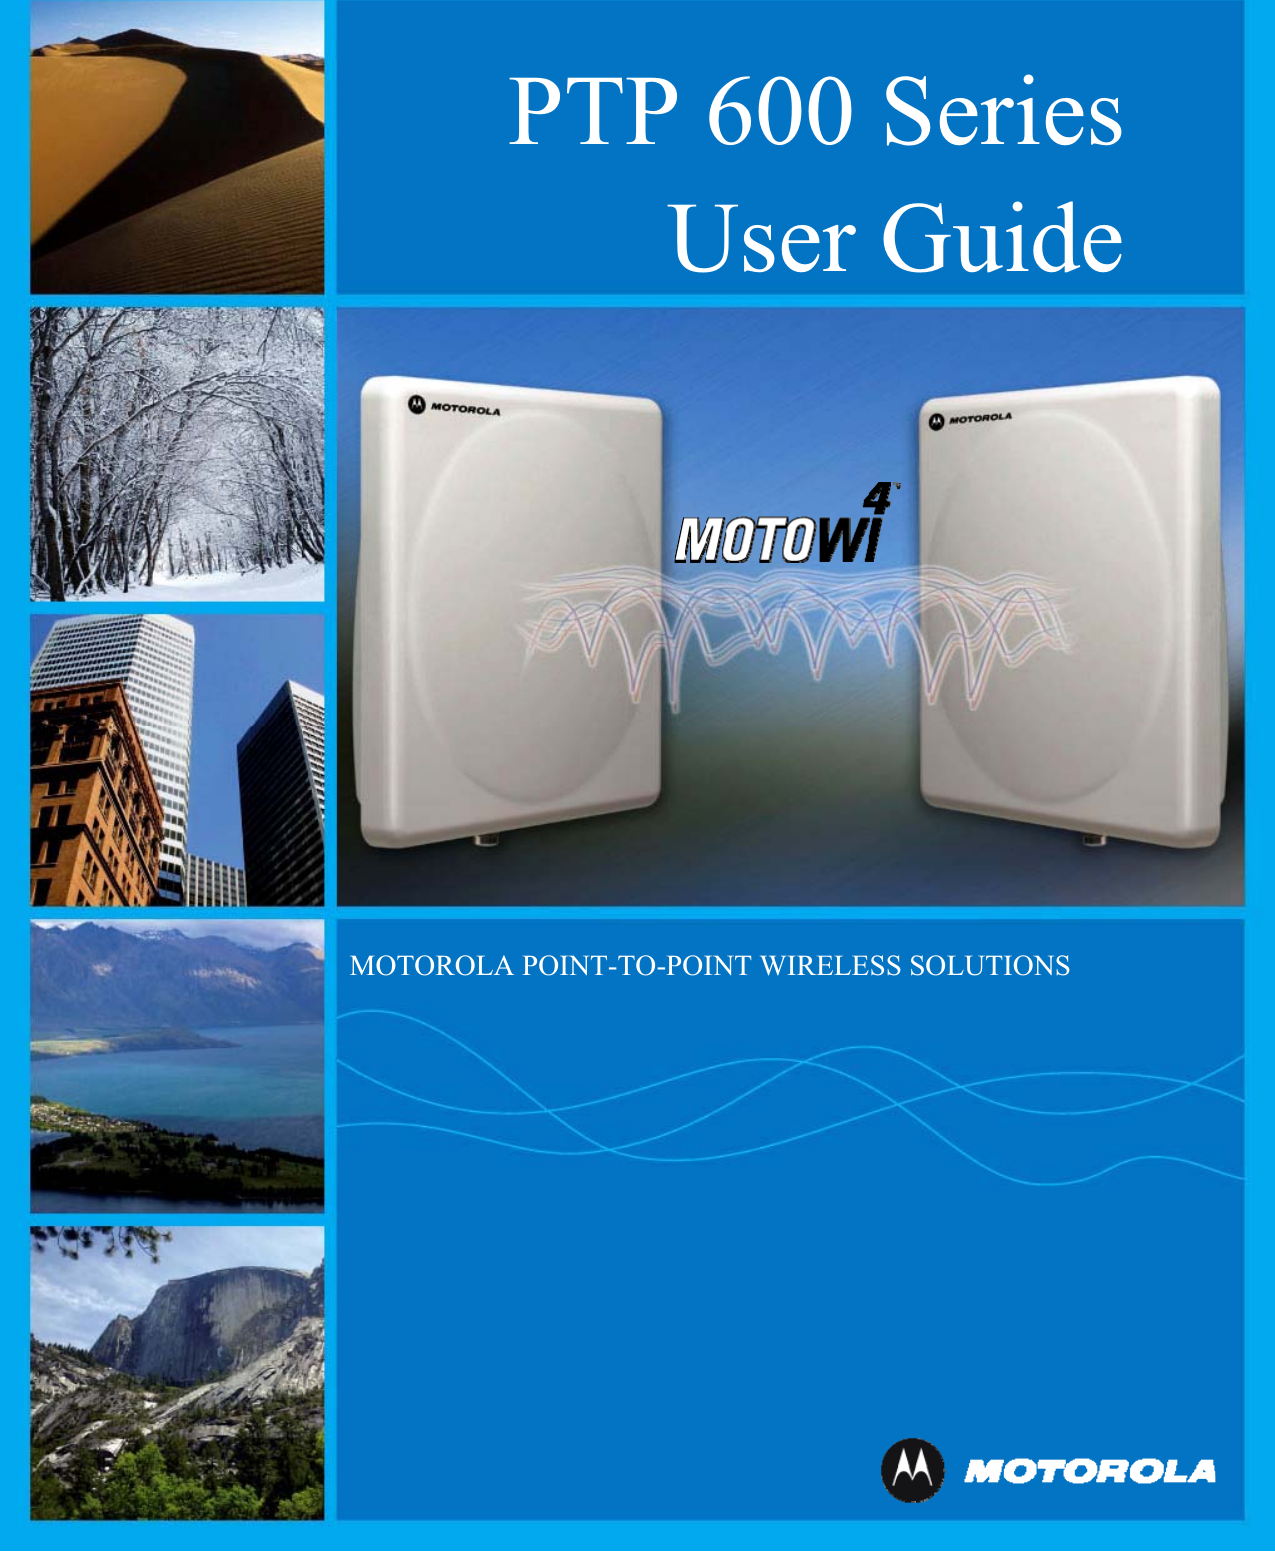 PTP 600 Series User Guide              MOTOROLA POINT-TO-POINT WIRELESS SOLUTIONS 